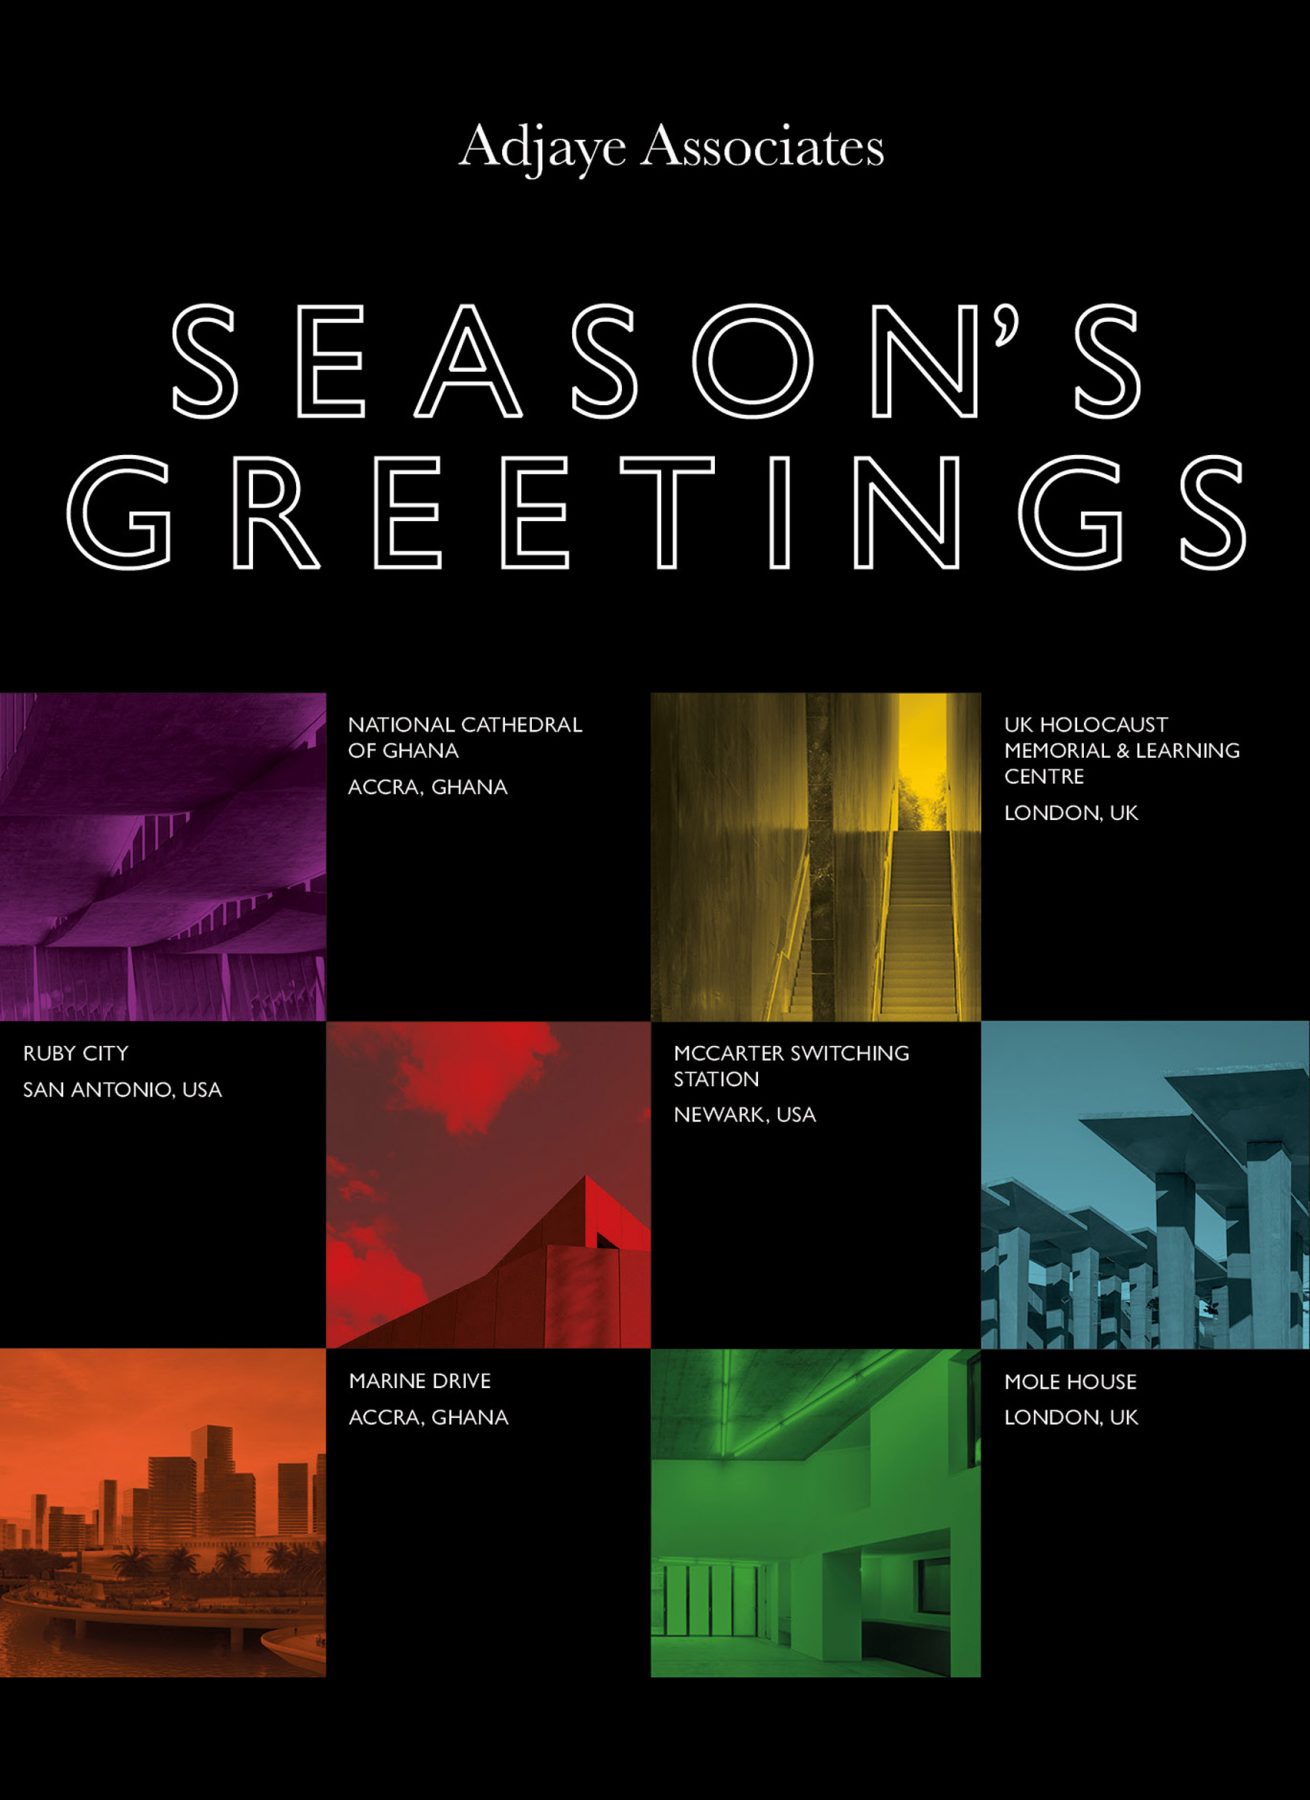 Archisearch Season’s Greetings by Architects & Designers for 2018